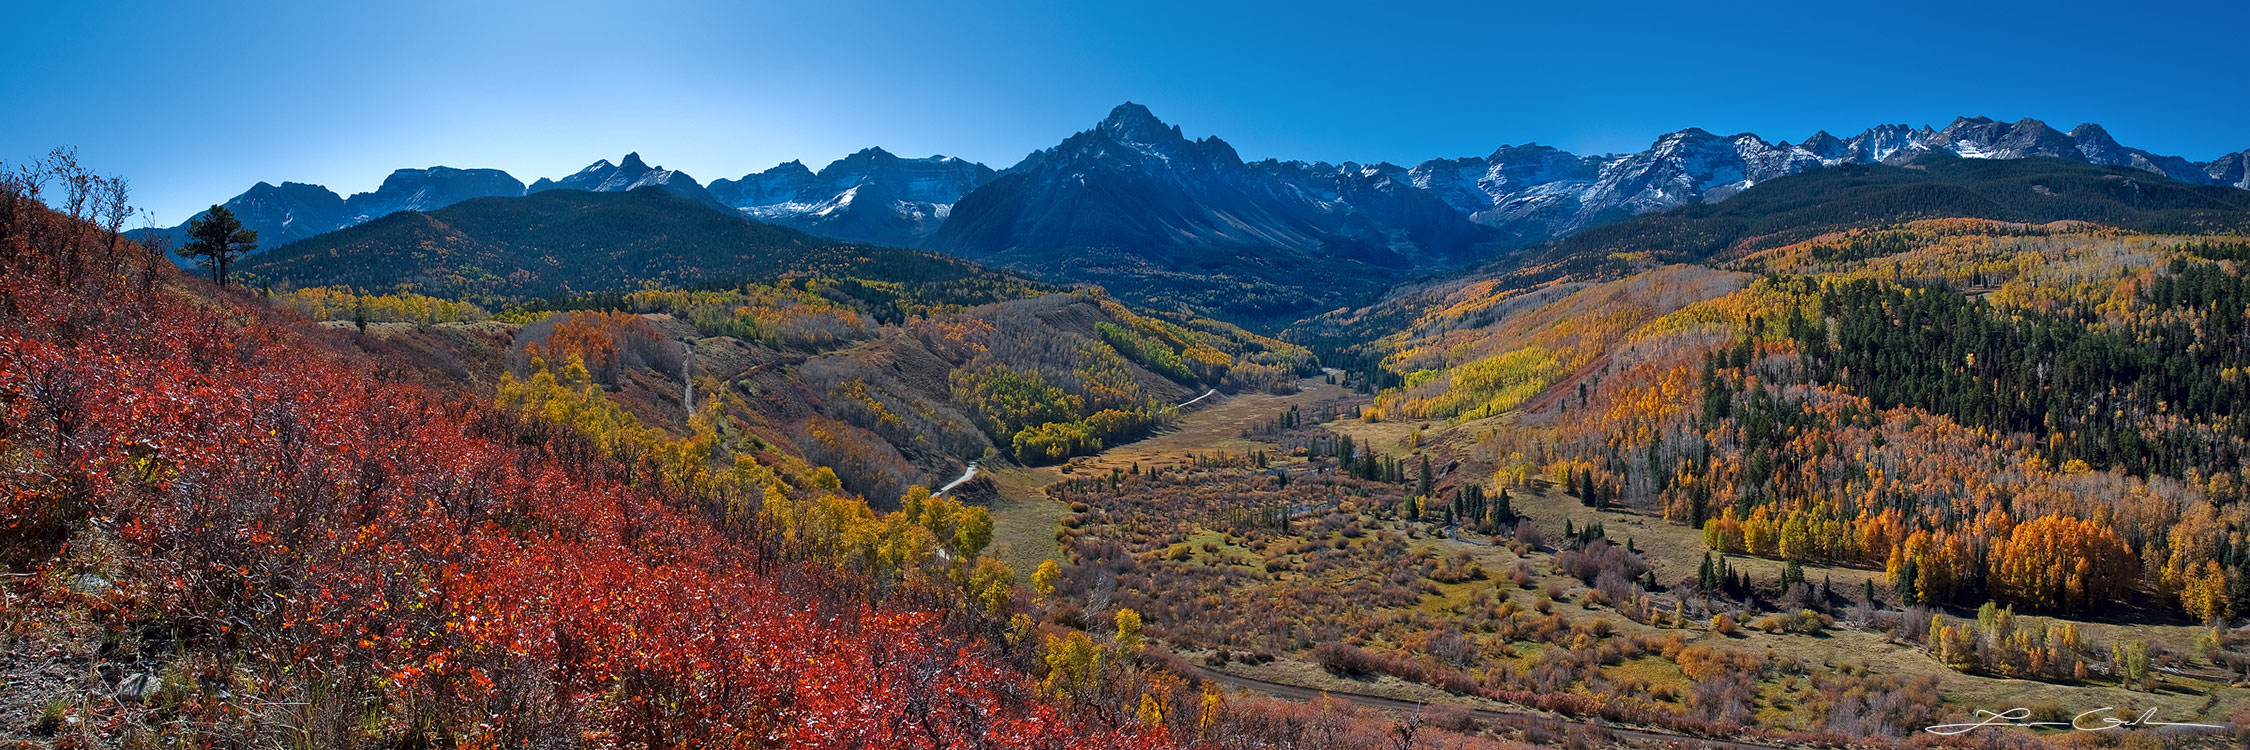 Red and orange fall colors of trees, shrubs around a beautiful valley and big mountains with blue skies